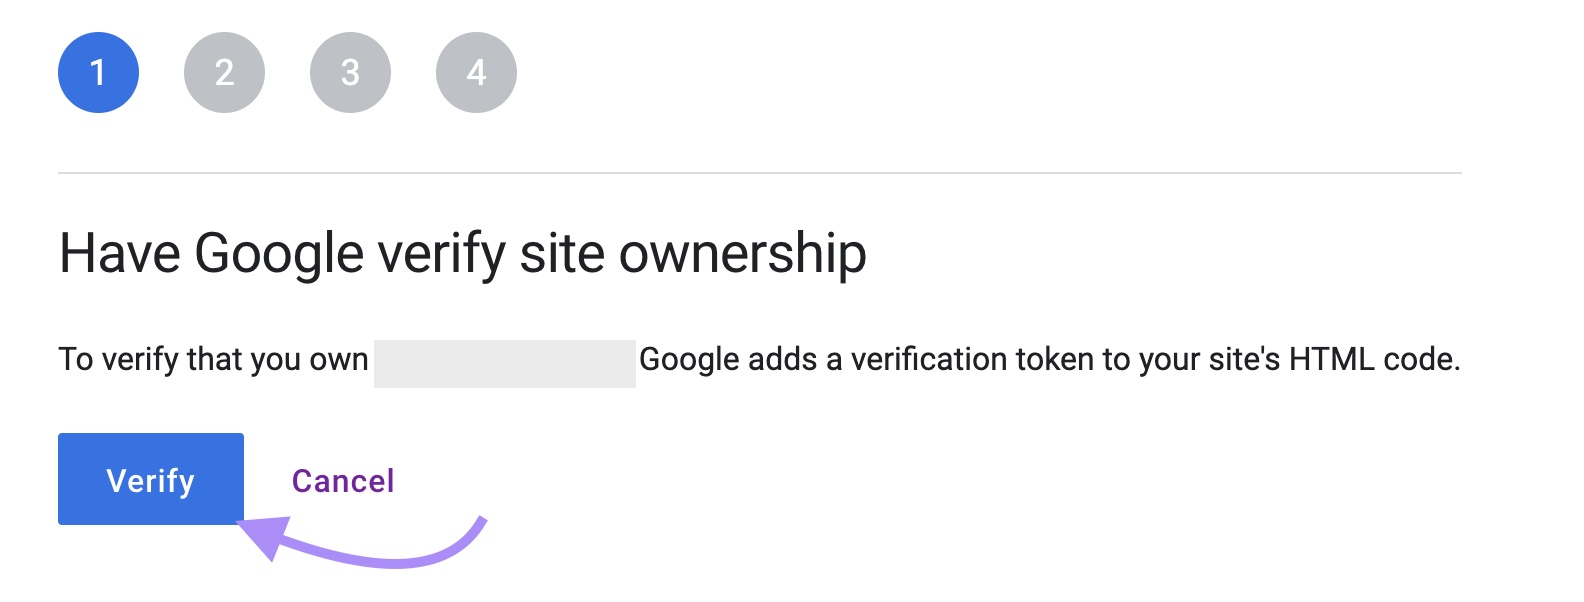 Have Google verify site ownership